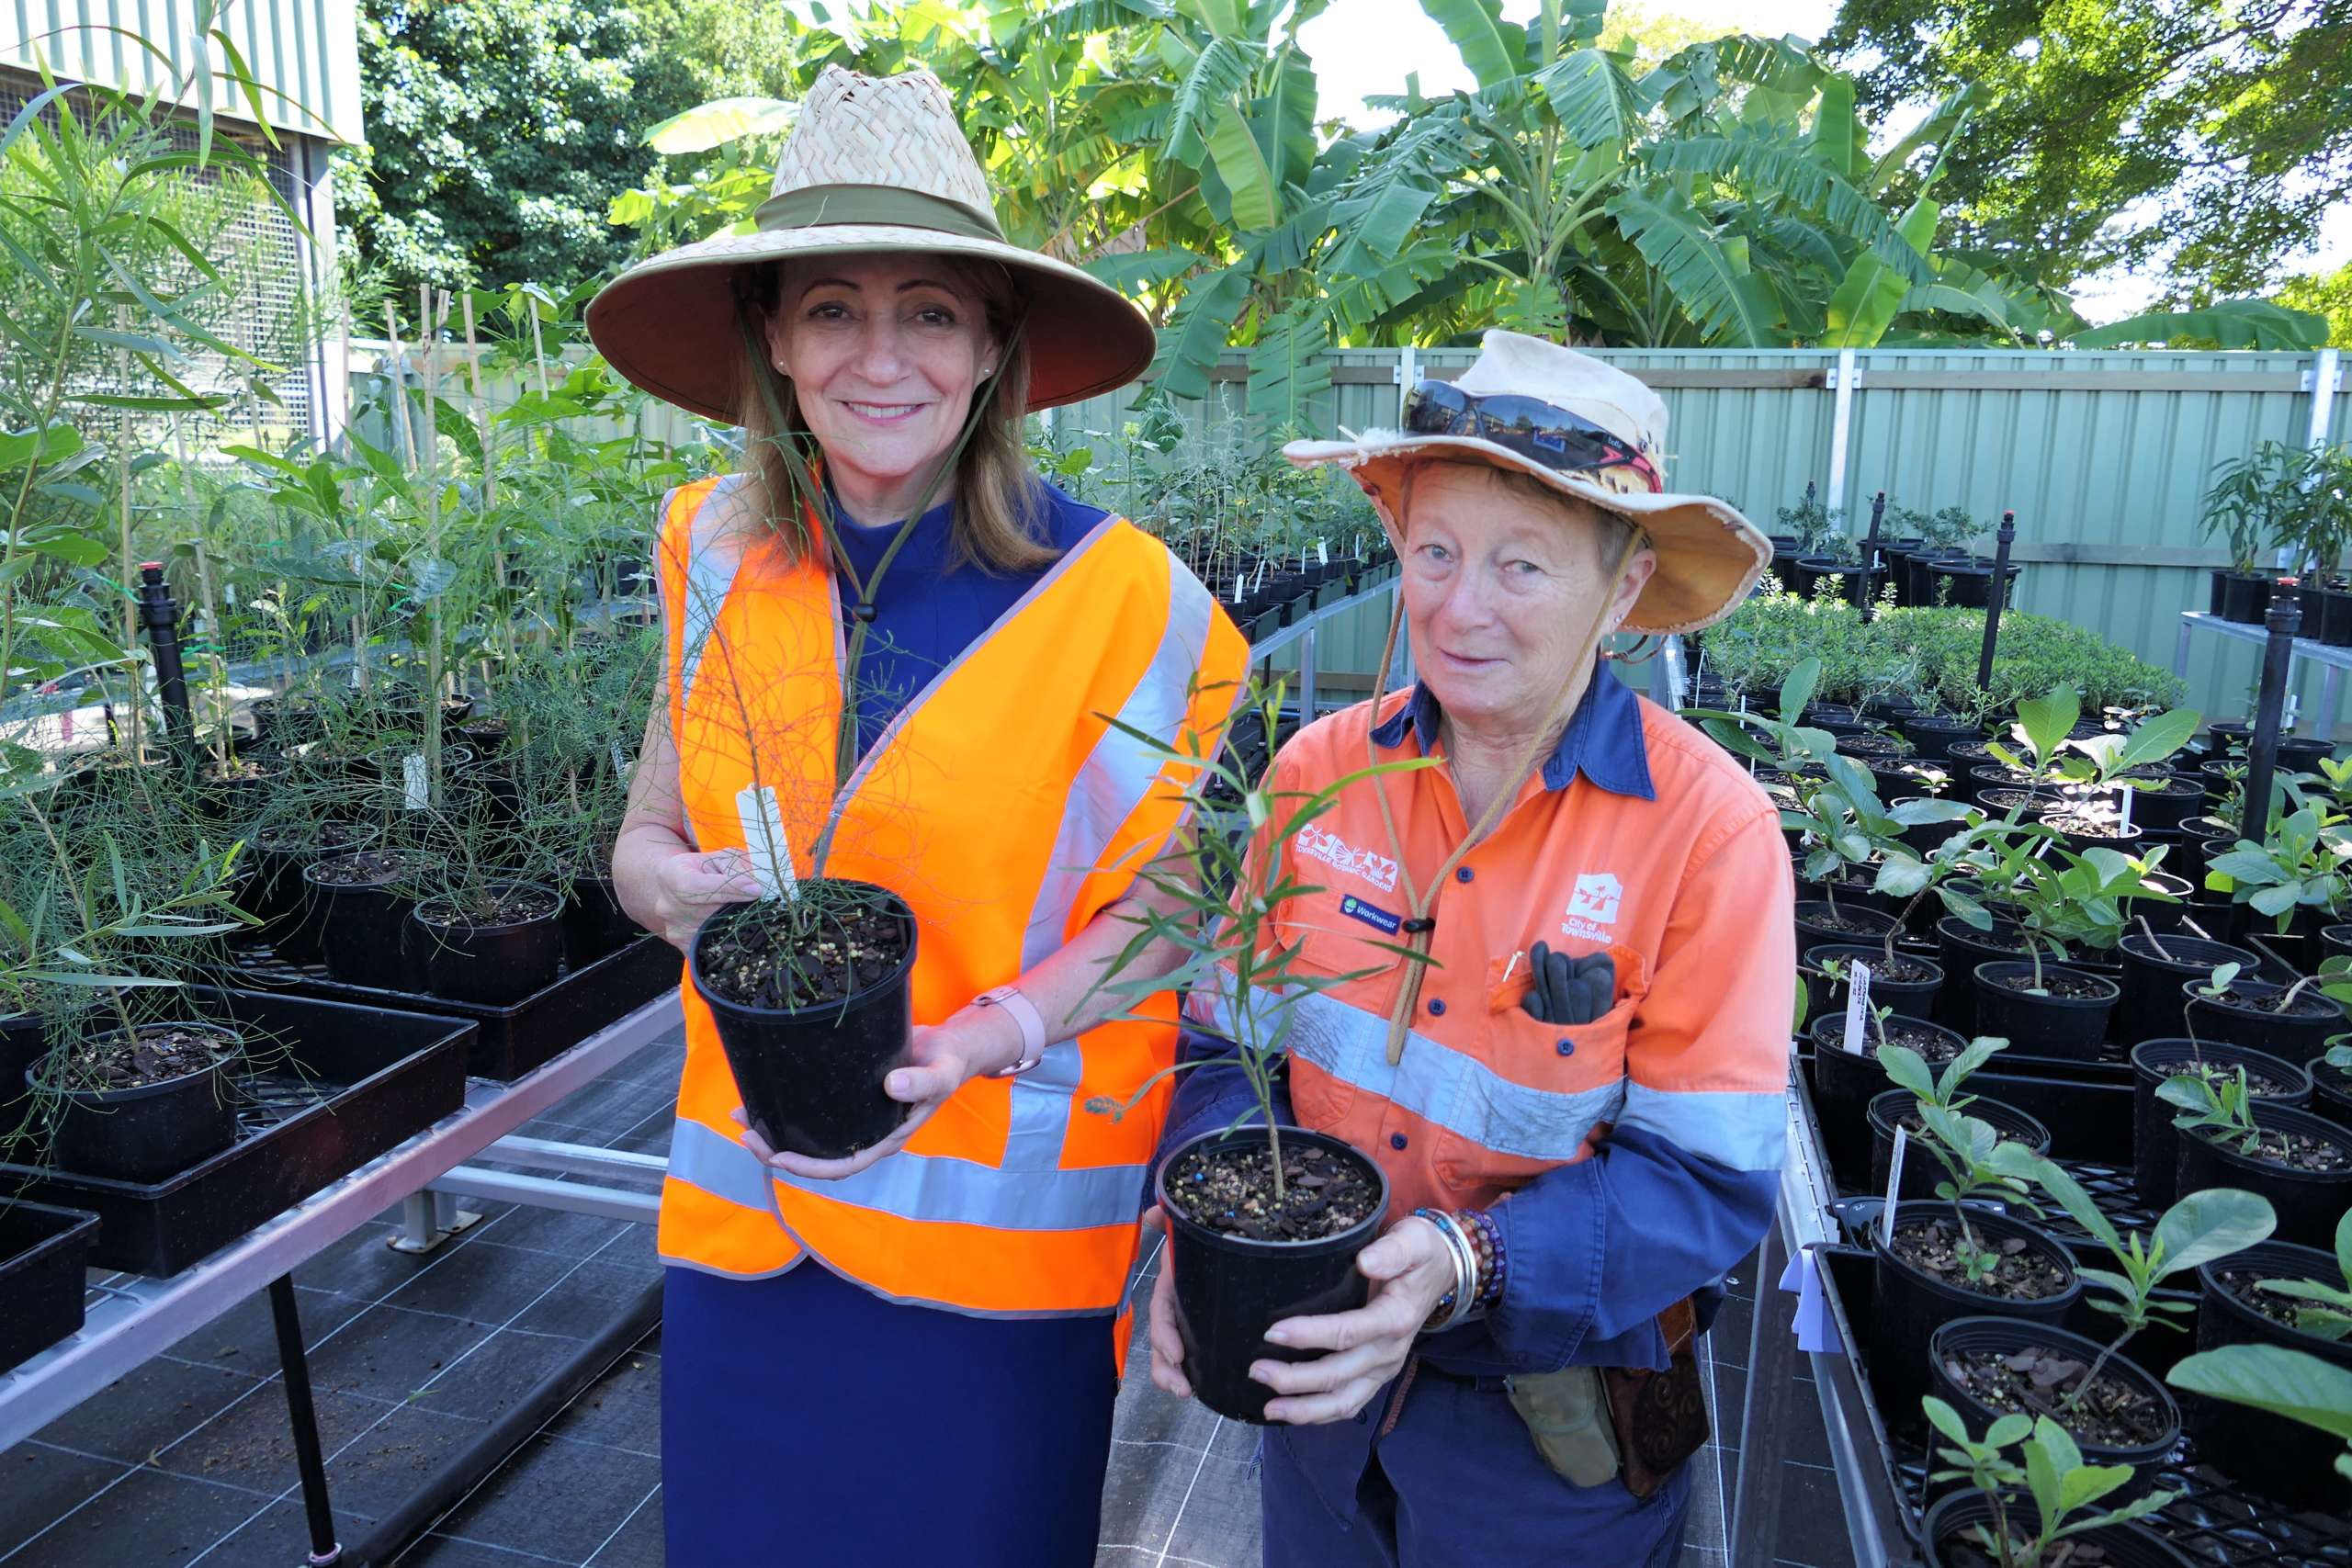 NEW NURSERY SPROUTS NATIVE DRY TROPICS GARDENING TRANSFORMATION FOR CITY